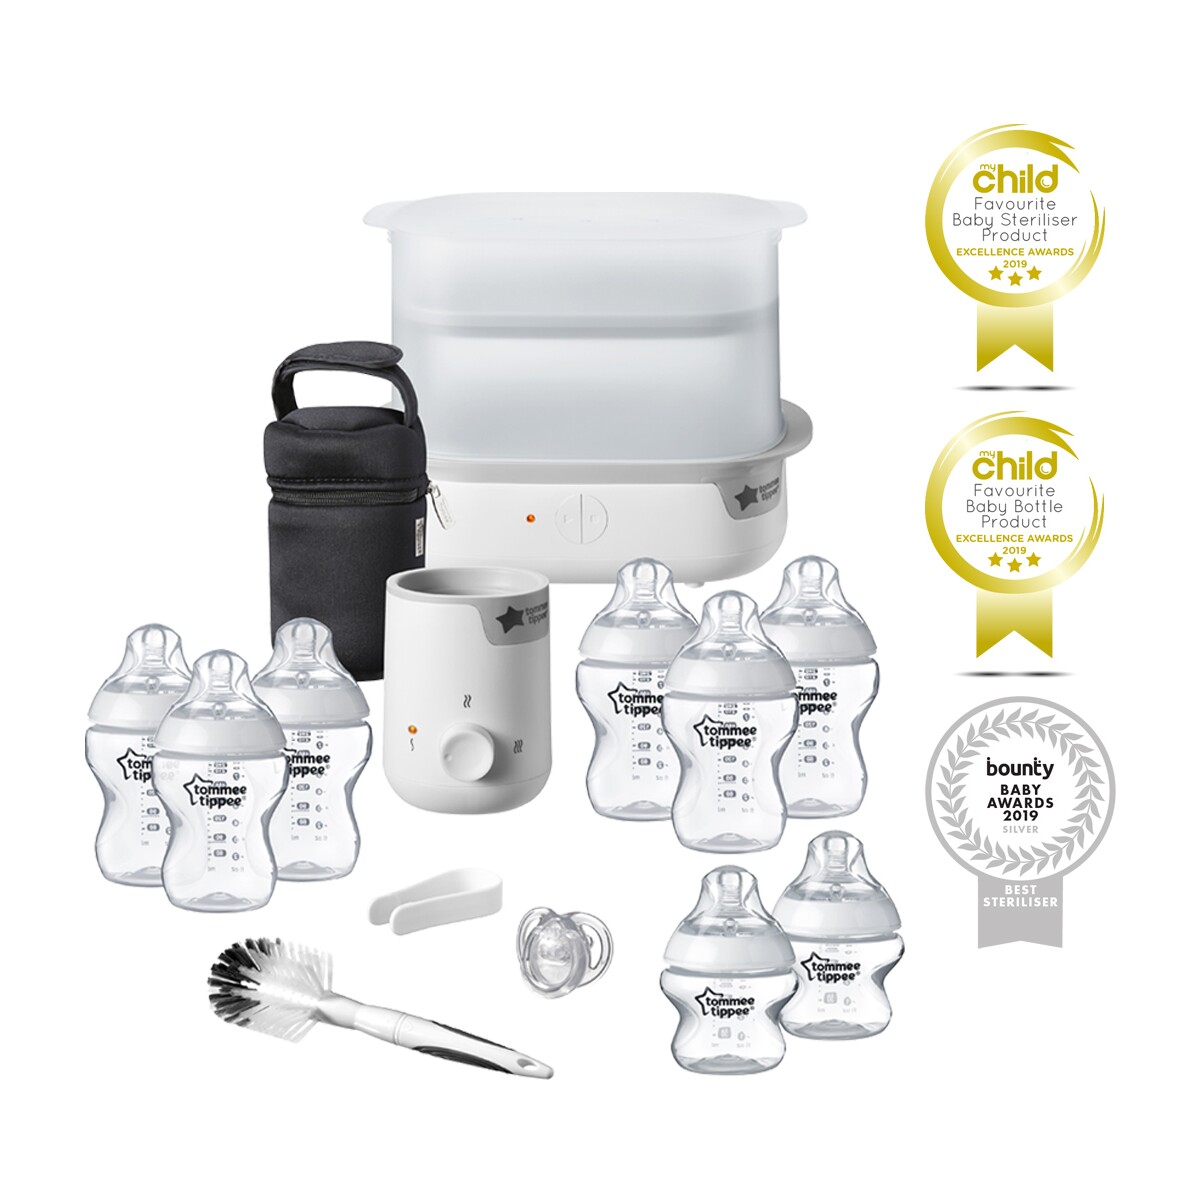 Tommee Tippee complete feeding set  Tommee tippee, New baby products,  Closer to nature